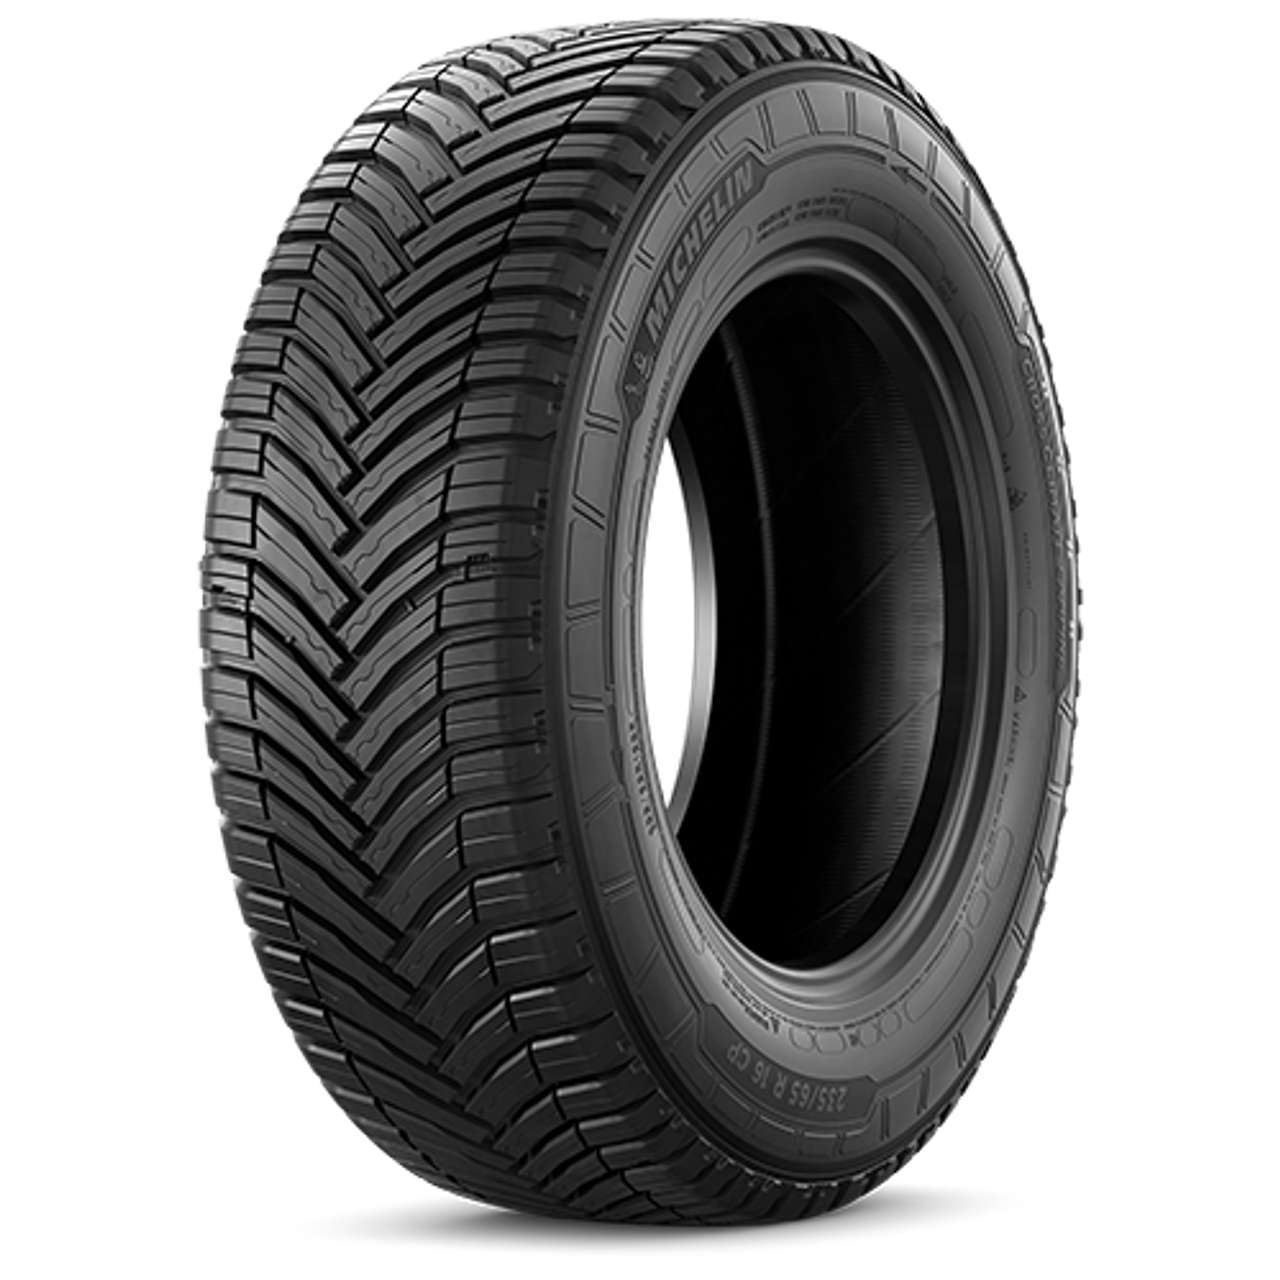 MICHELIN CROSSCLIMATE CAMPING 215/70R15C 109R BSW